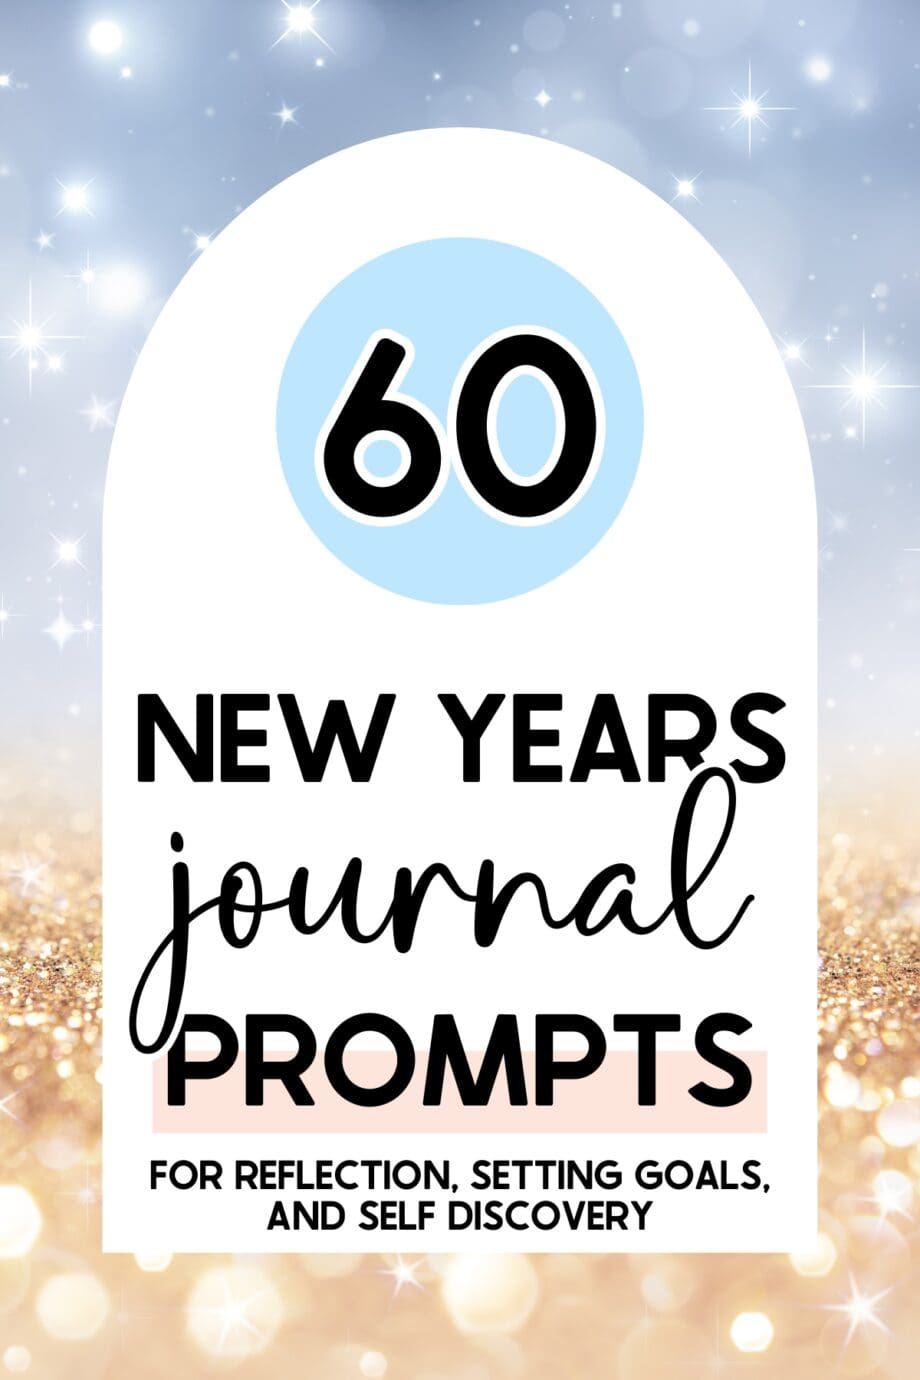 Kickstart your new year with these 60 inspiring journal prompts! Reflect on the past, set your goals for the future, and cultivate a laser-sharp focus. Unleash your creativity as you embark on this journey of self-discovery and growth. Get ready to manifest your dreams, embrace positivity, and make the upcoming year your best one yet.